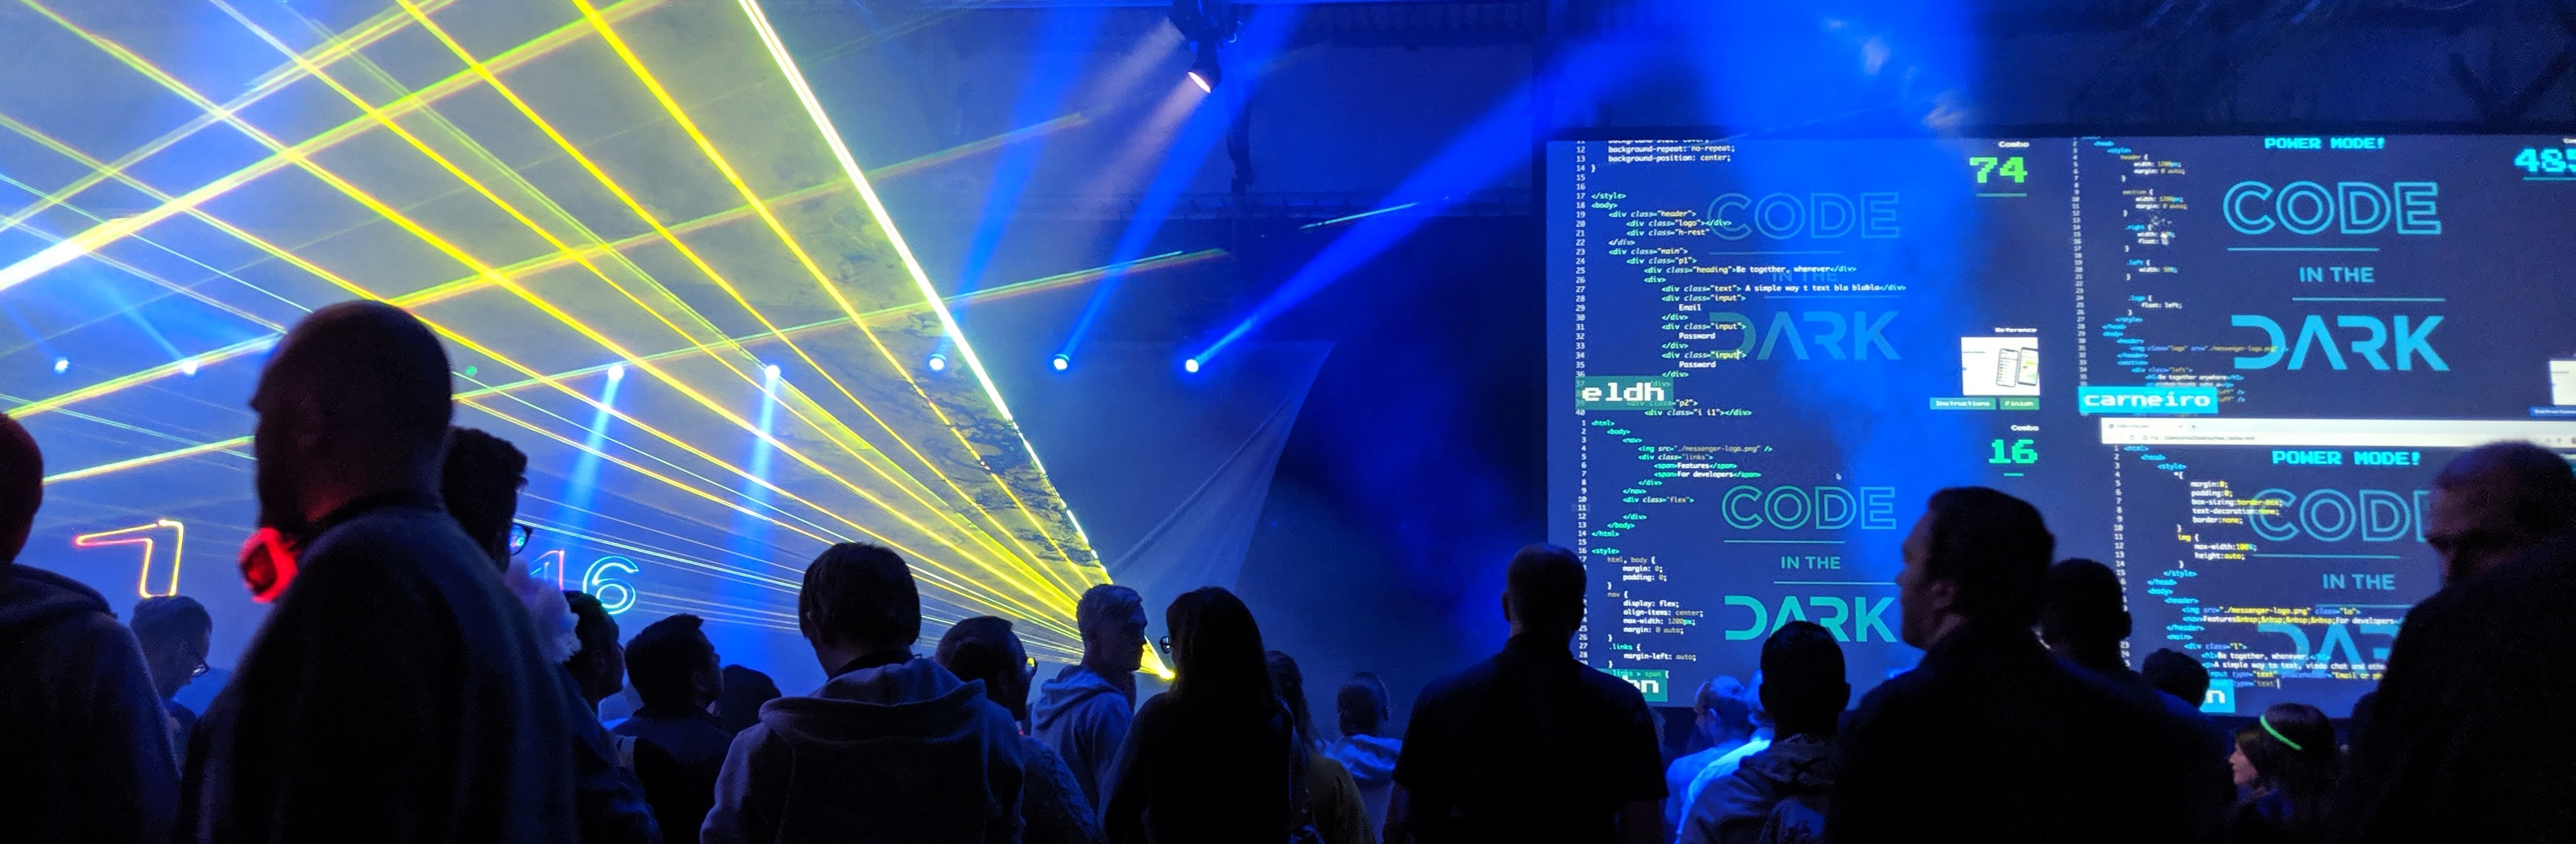 Code in the Dark, a competitive programming event at Nordic.js.